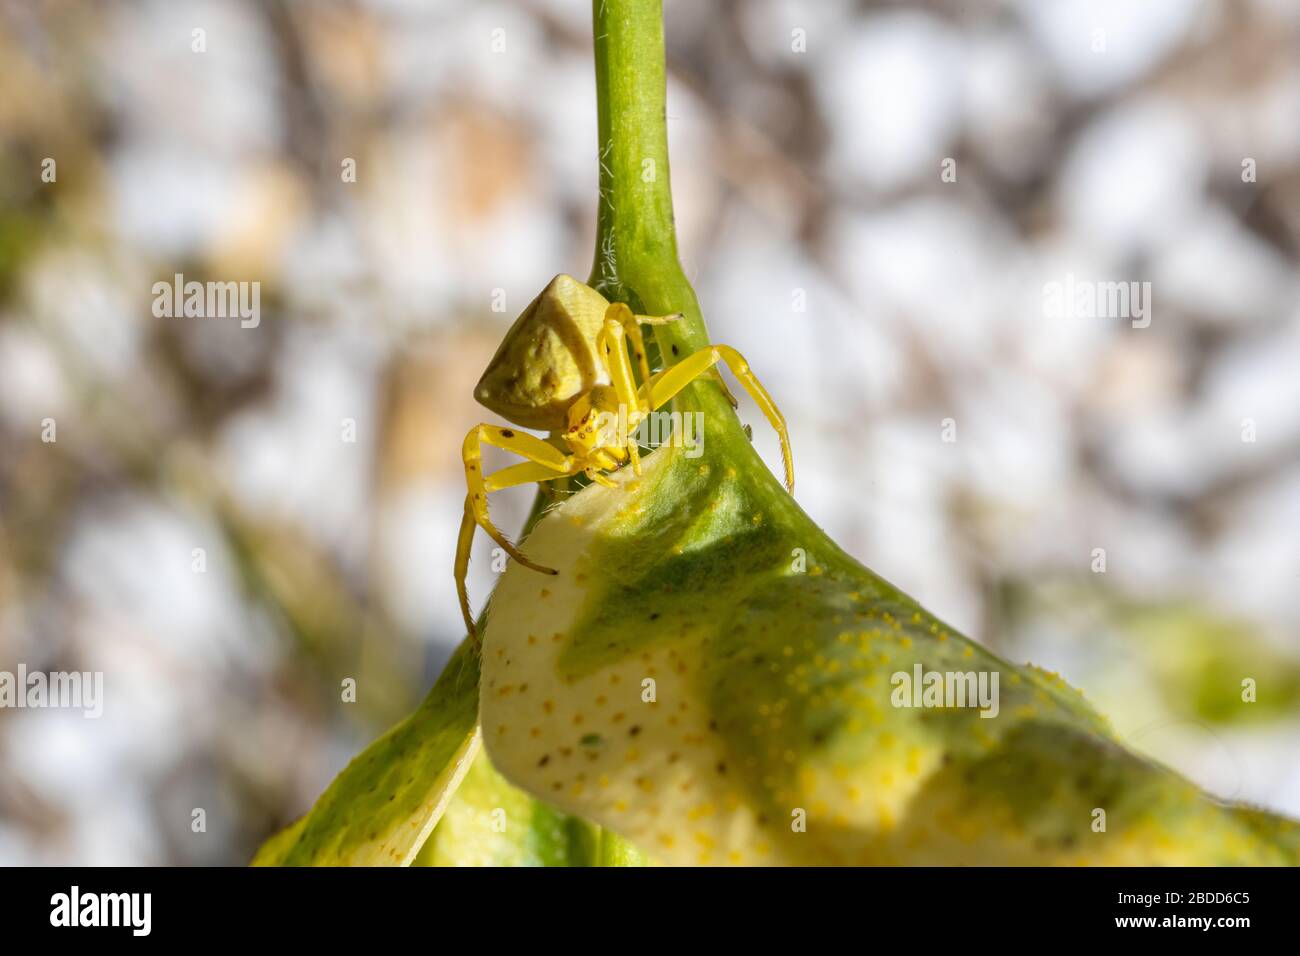 Yellow spider perched on the stem of a plant protecting its young, macro view Stock Photo